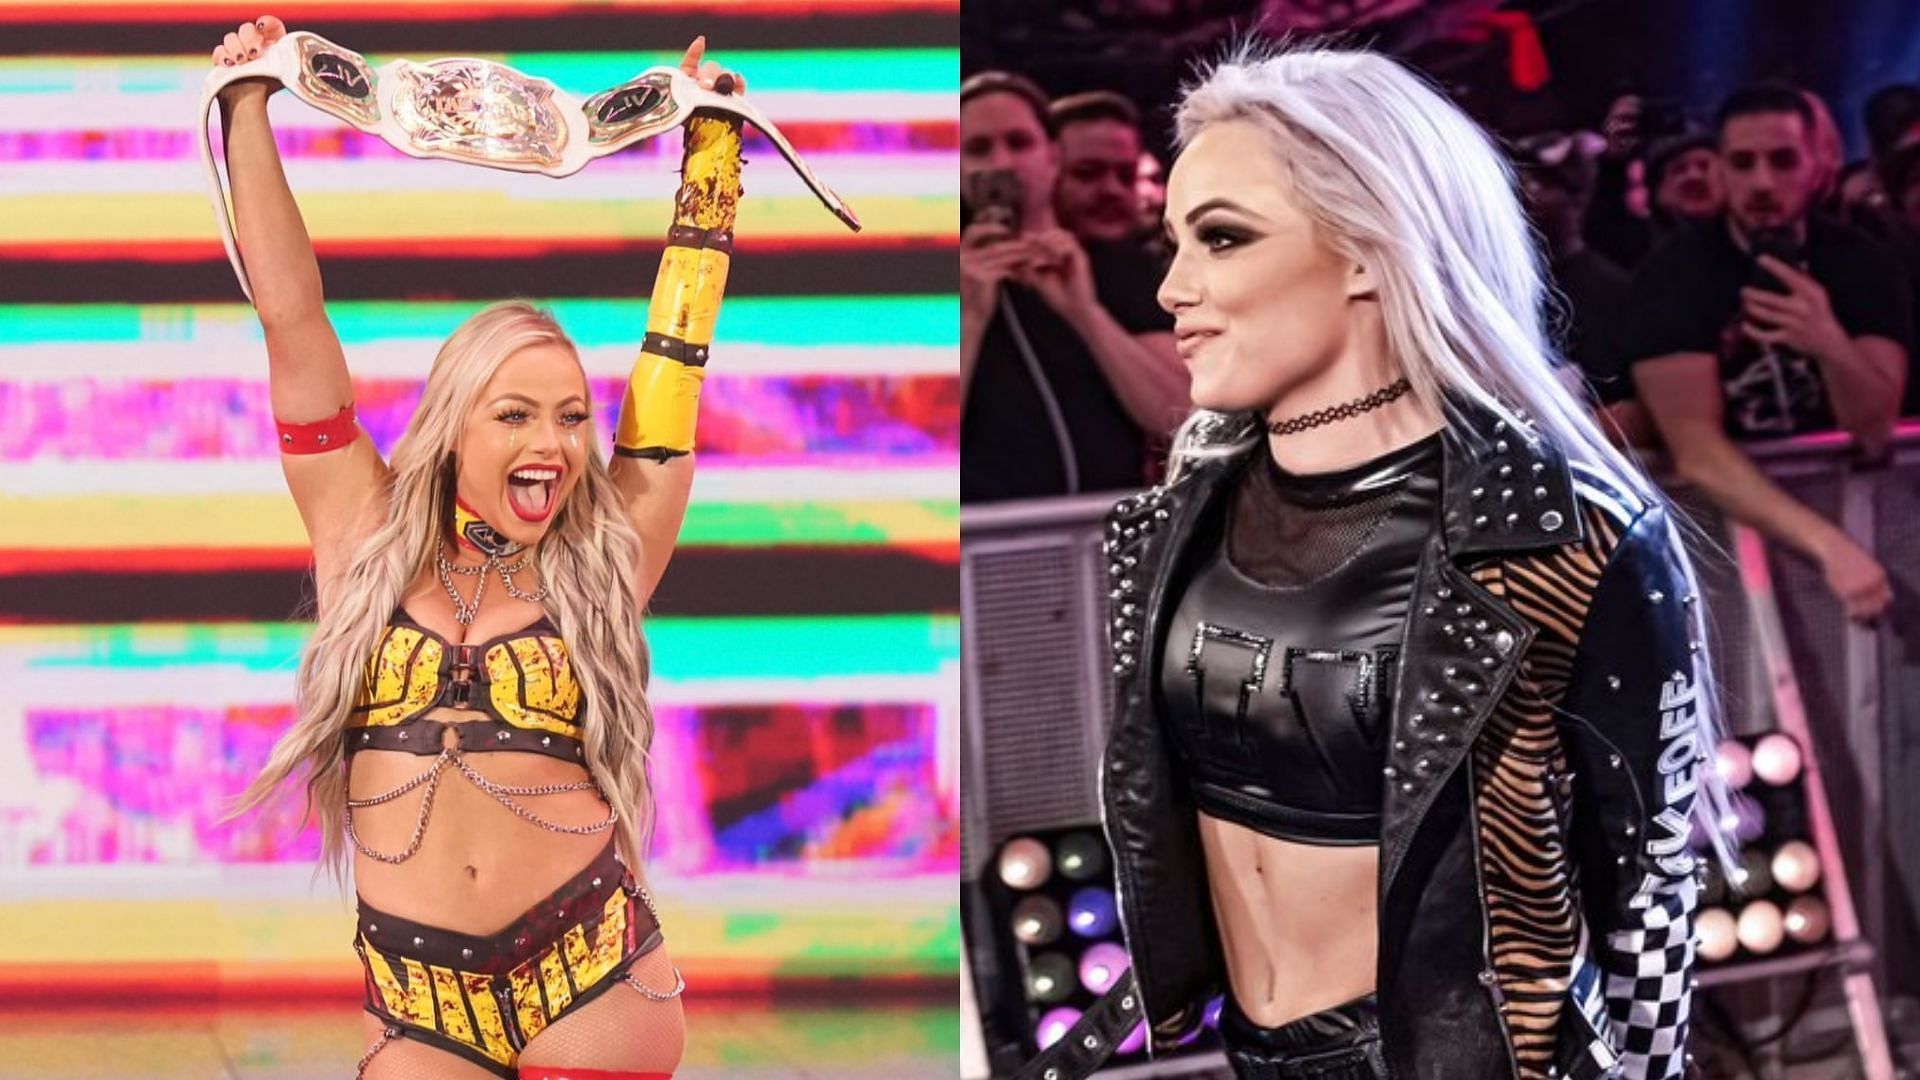 Liv Morgan was forced to vacate the WWE Women